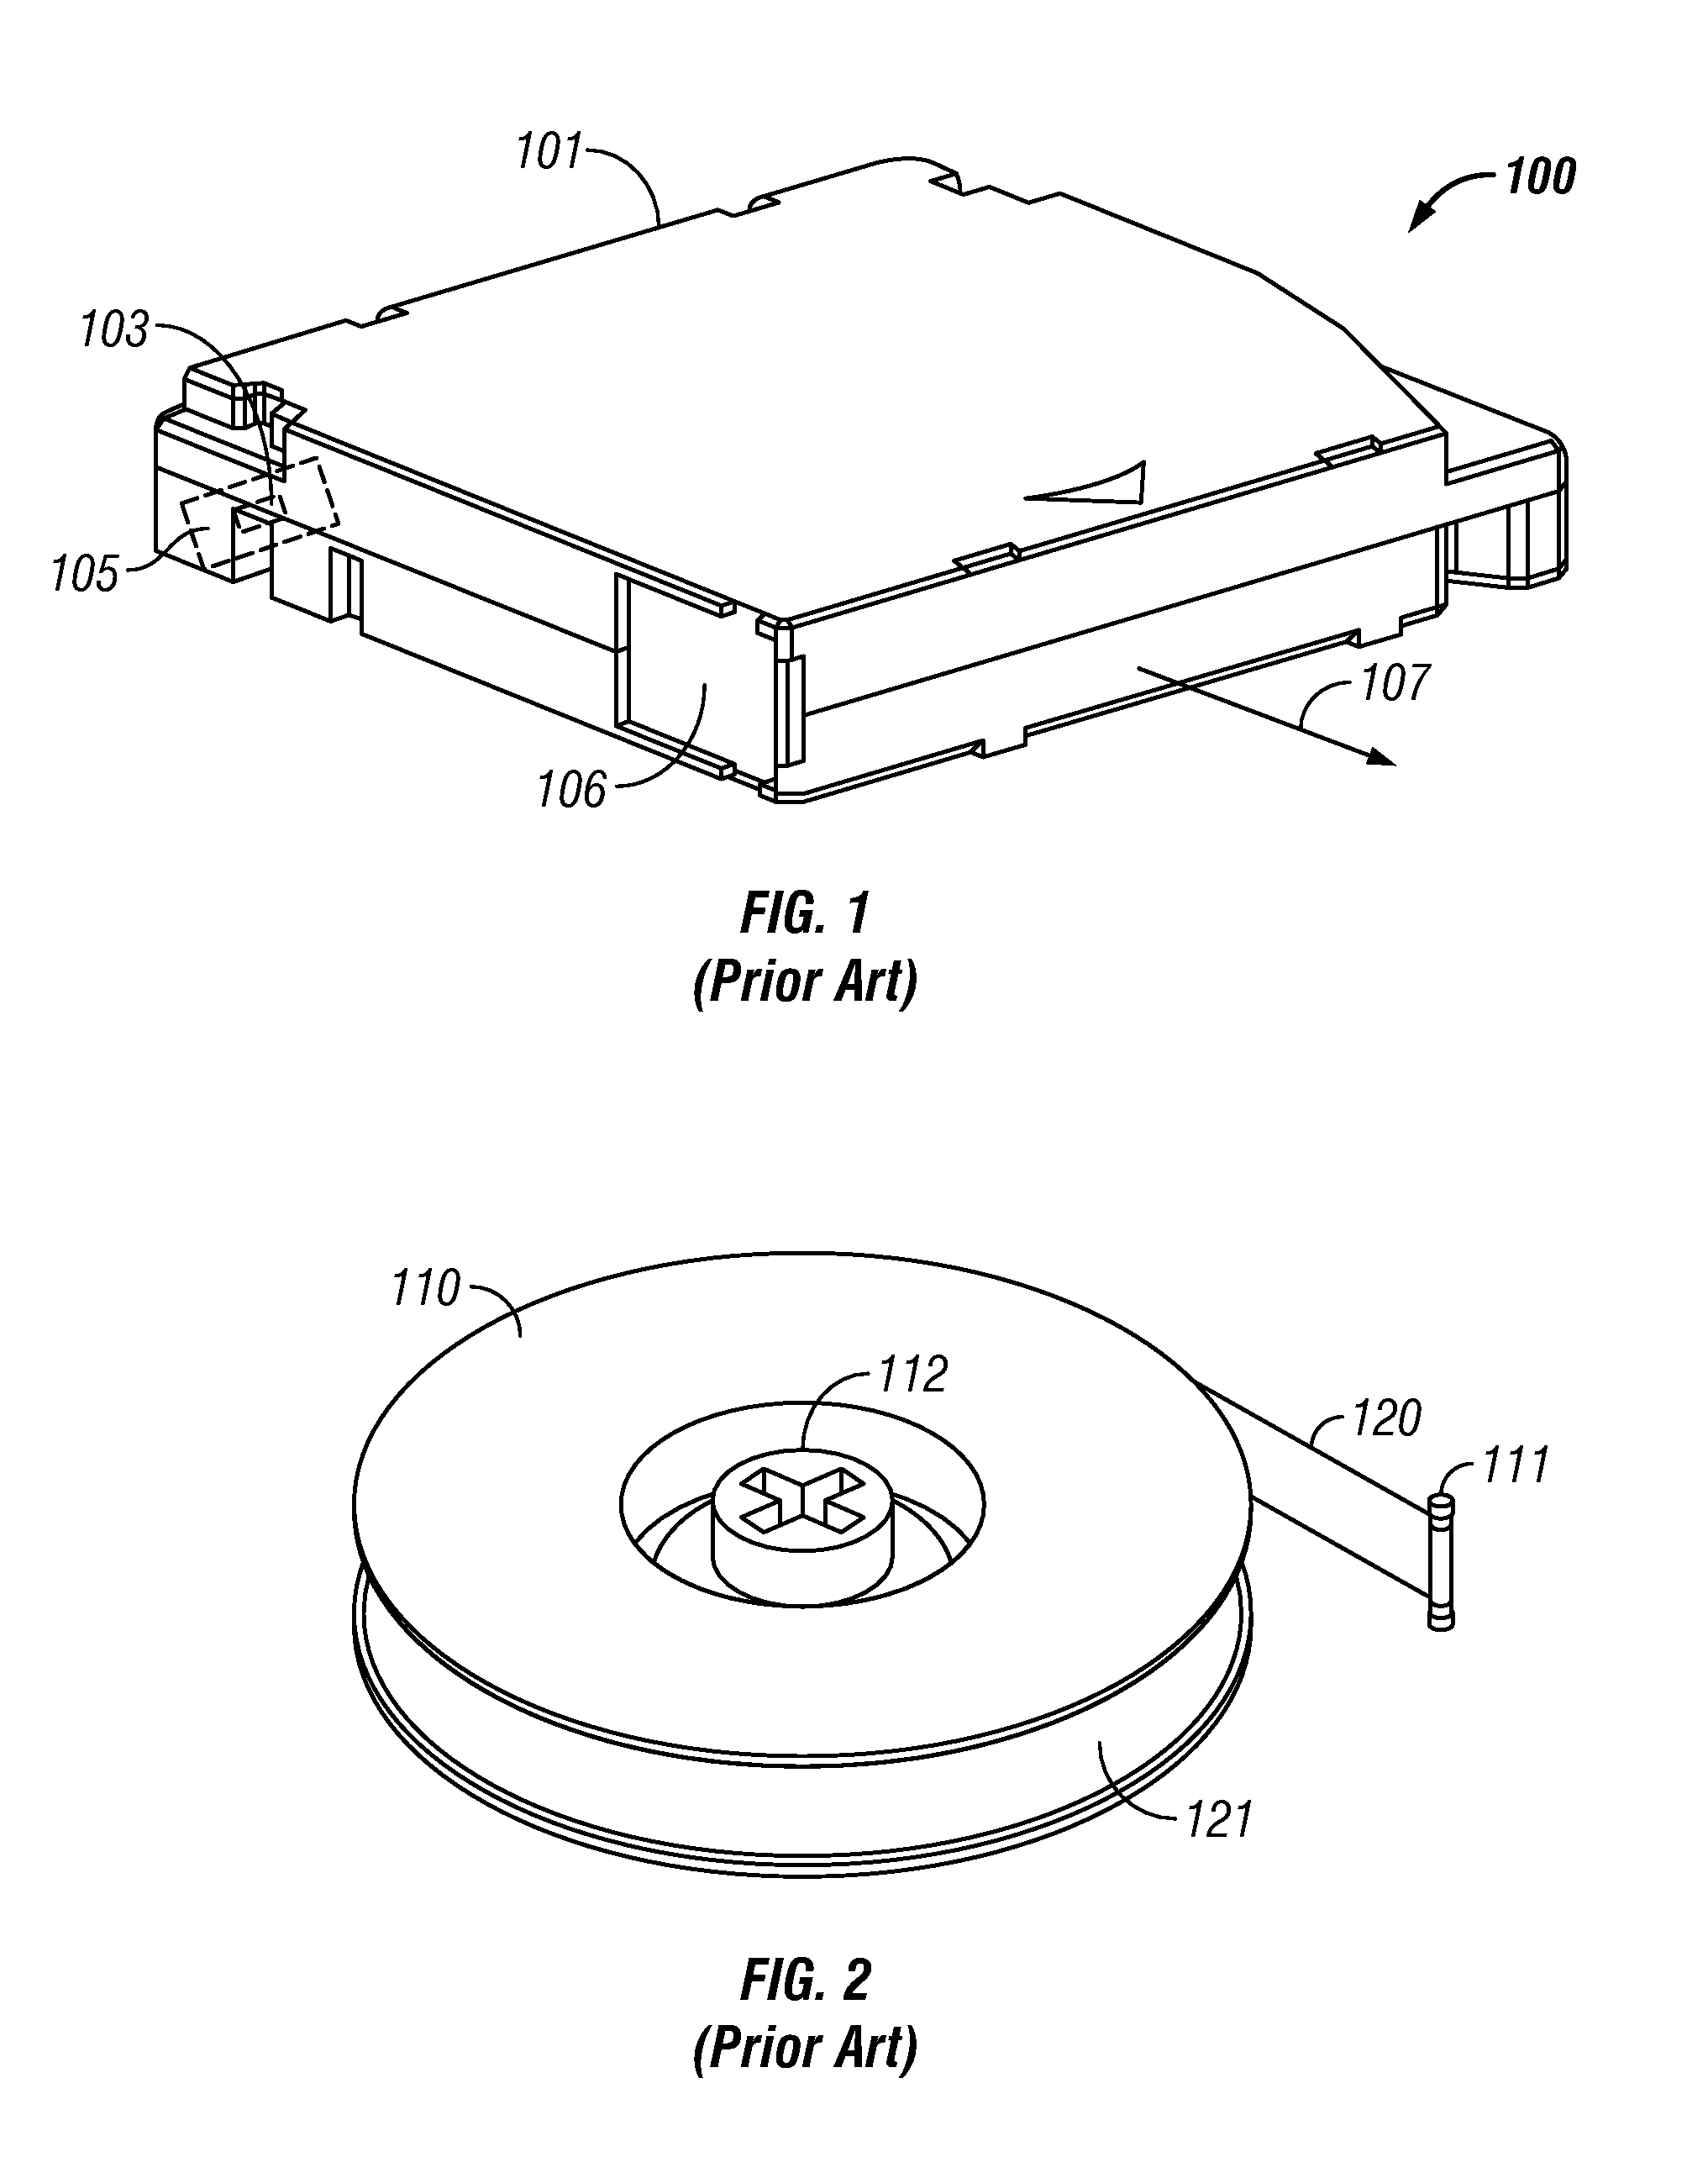 Fast forward magnetic tape cartridge at first mount